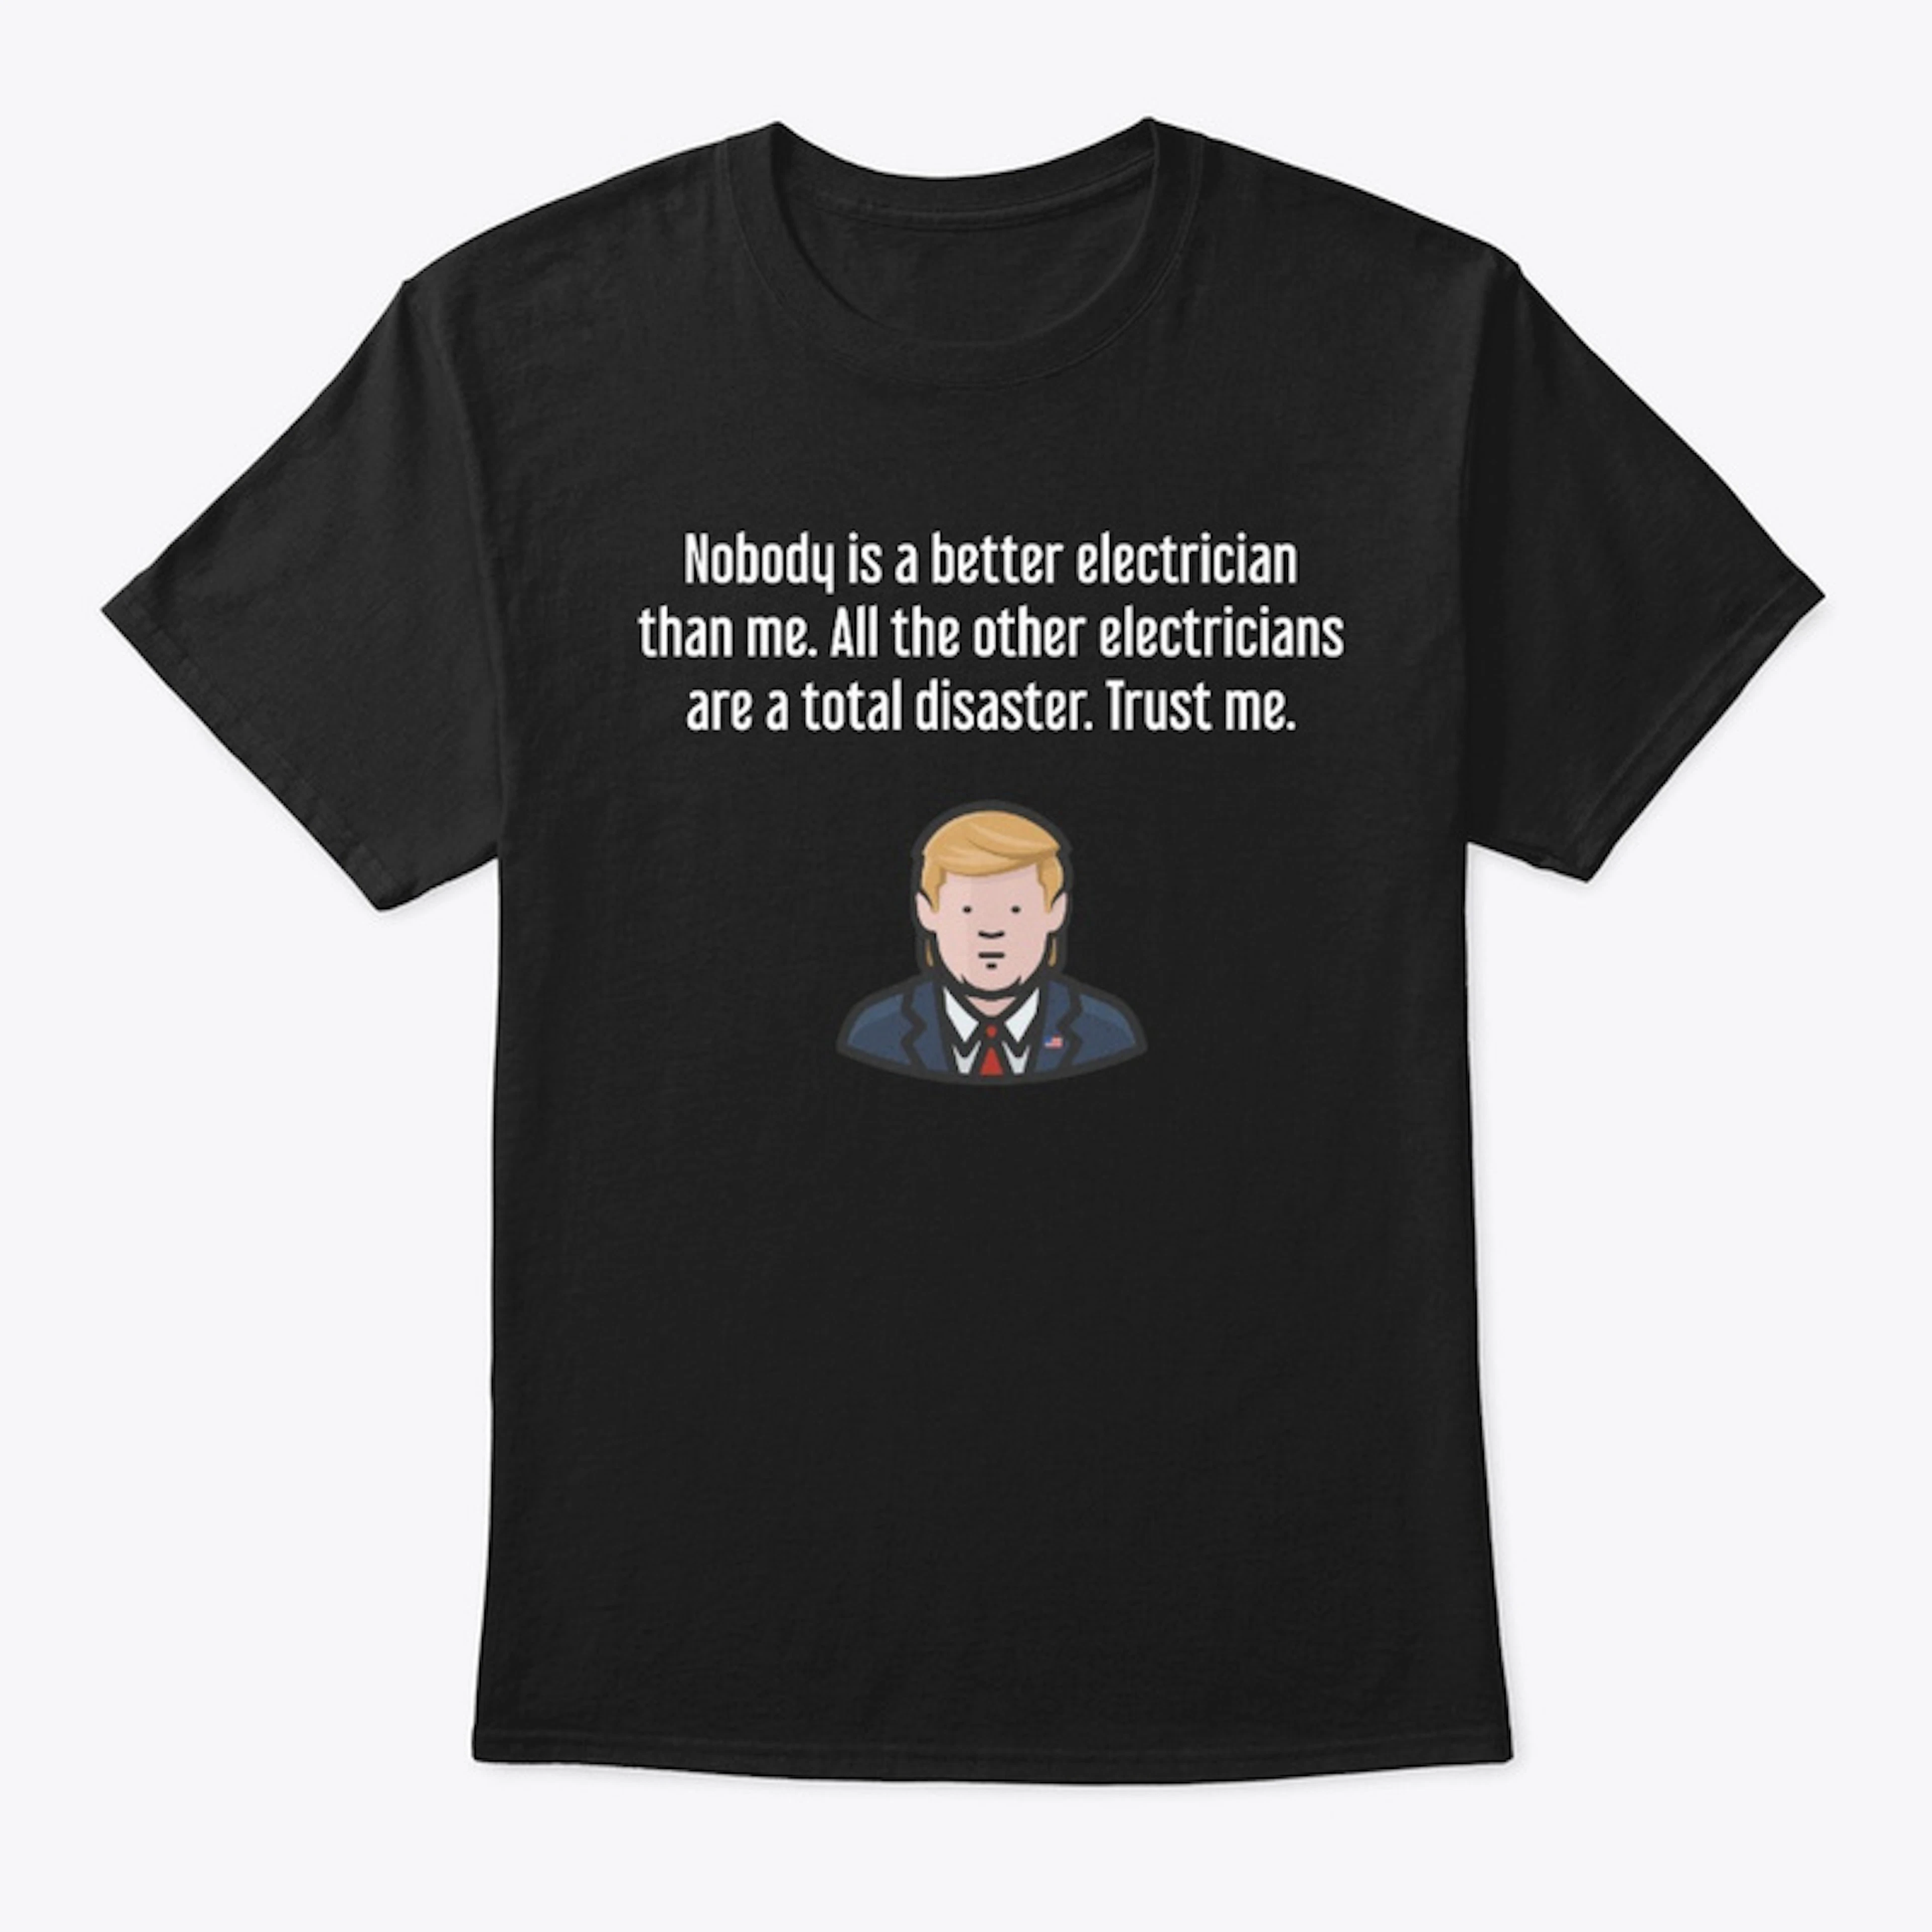 Better Electrician  Funny Shirt